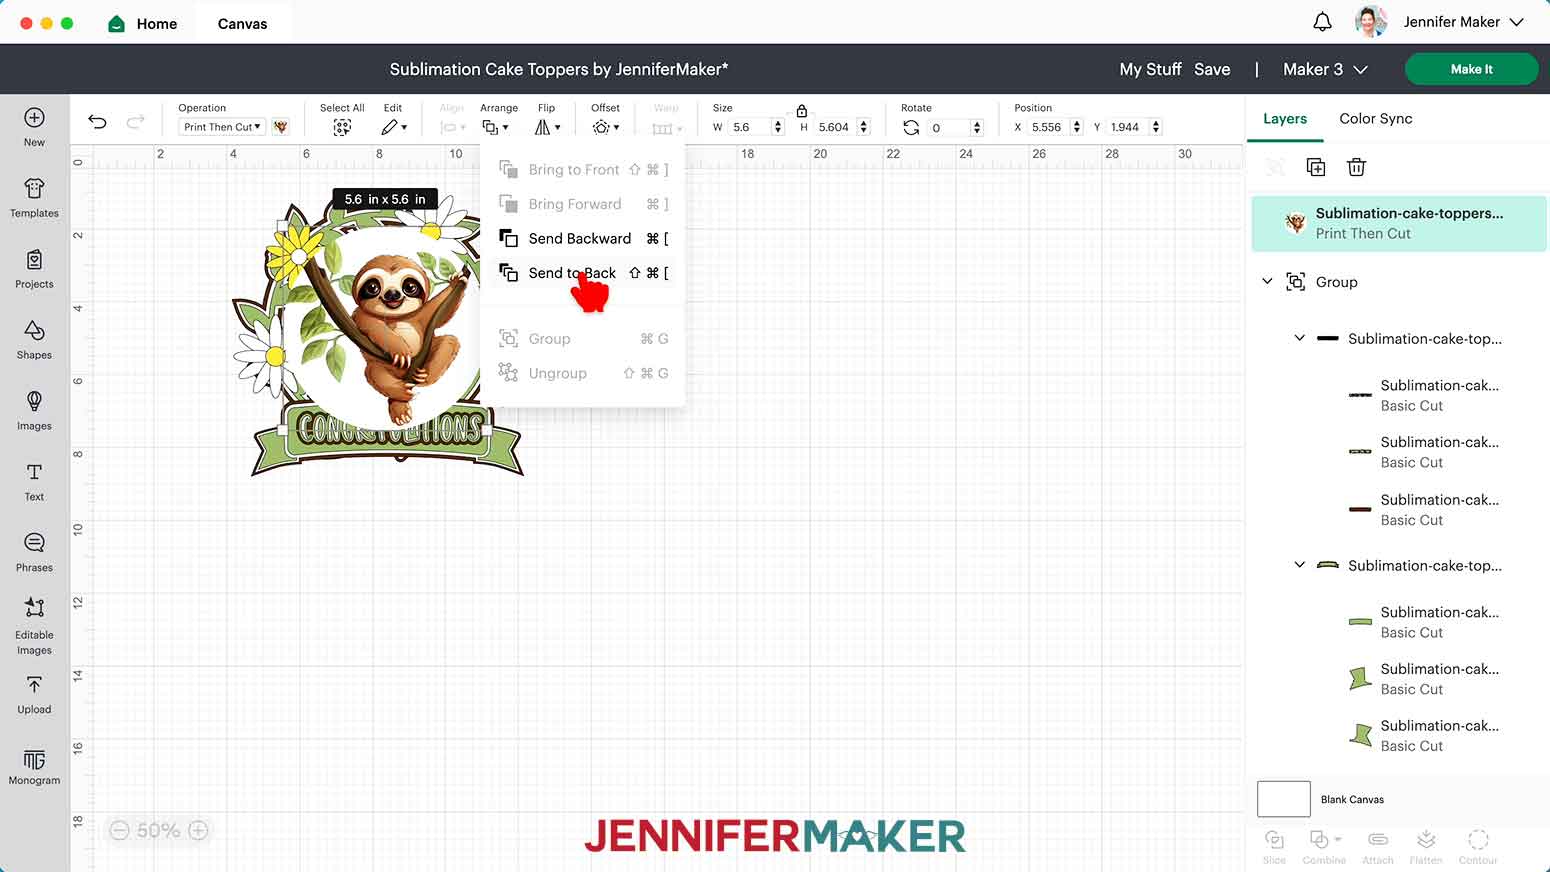 With the sloth layer selected, click Arrange and Send to Back to make it appear behind the cake topper SVG layers.